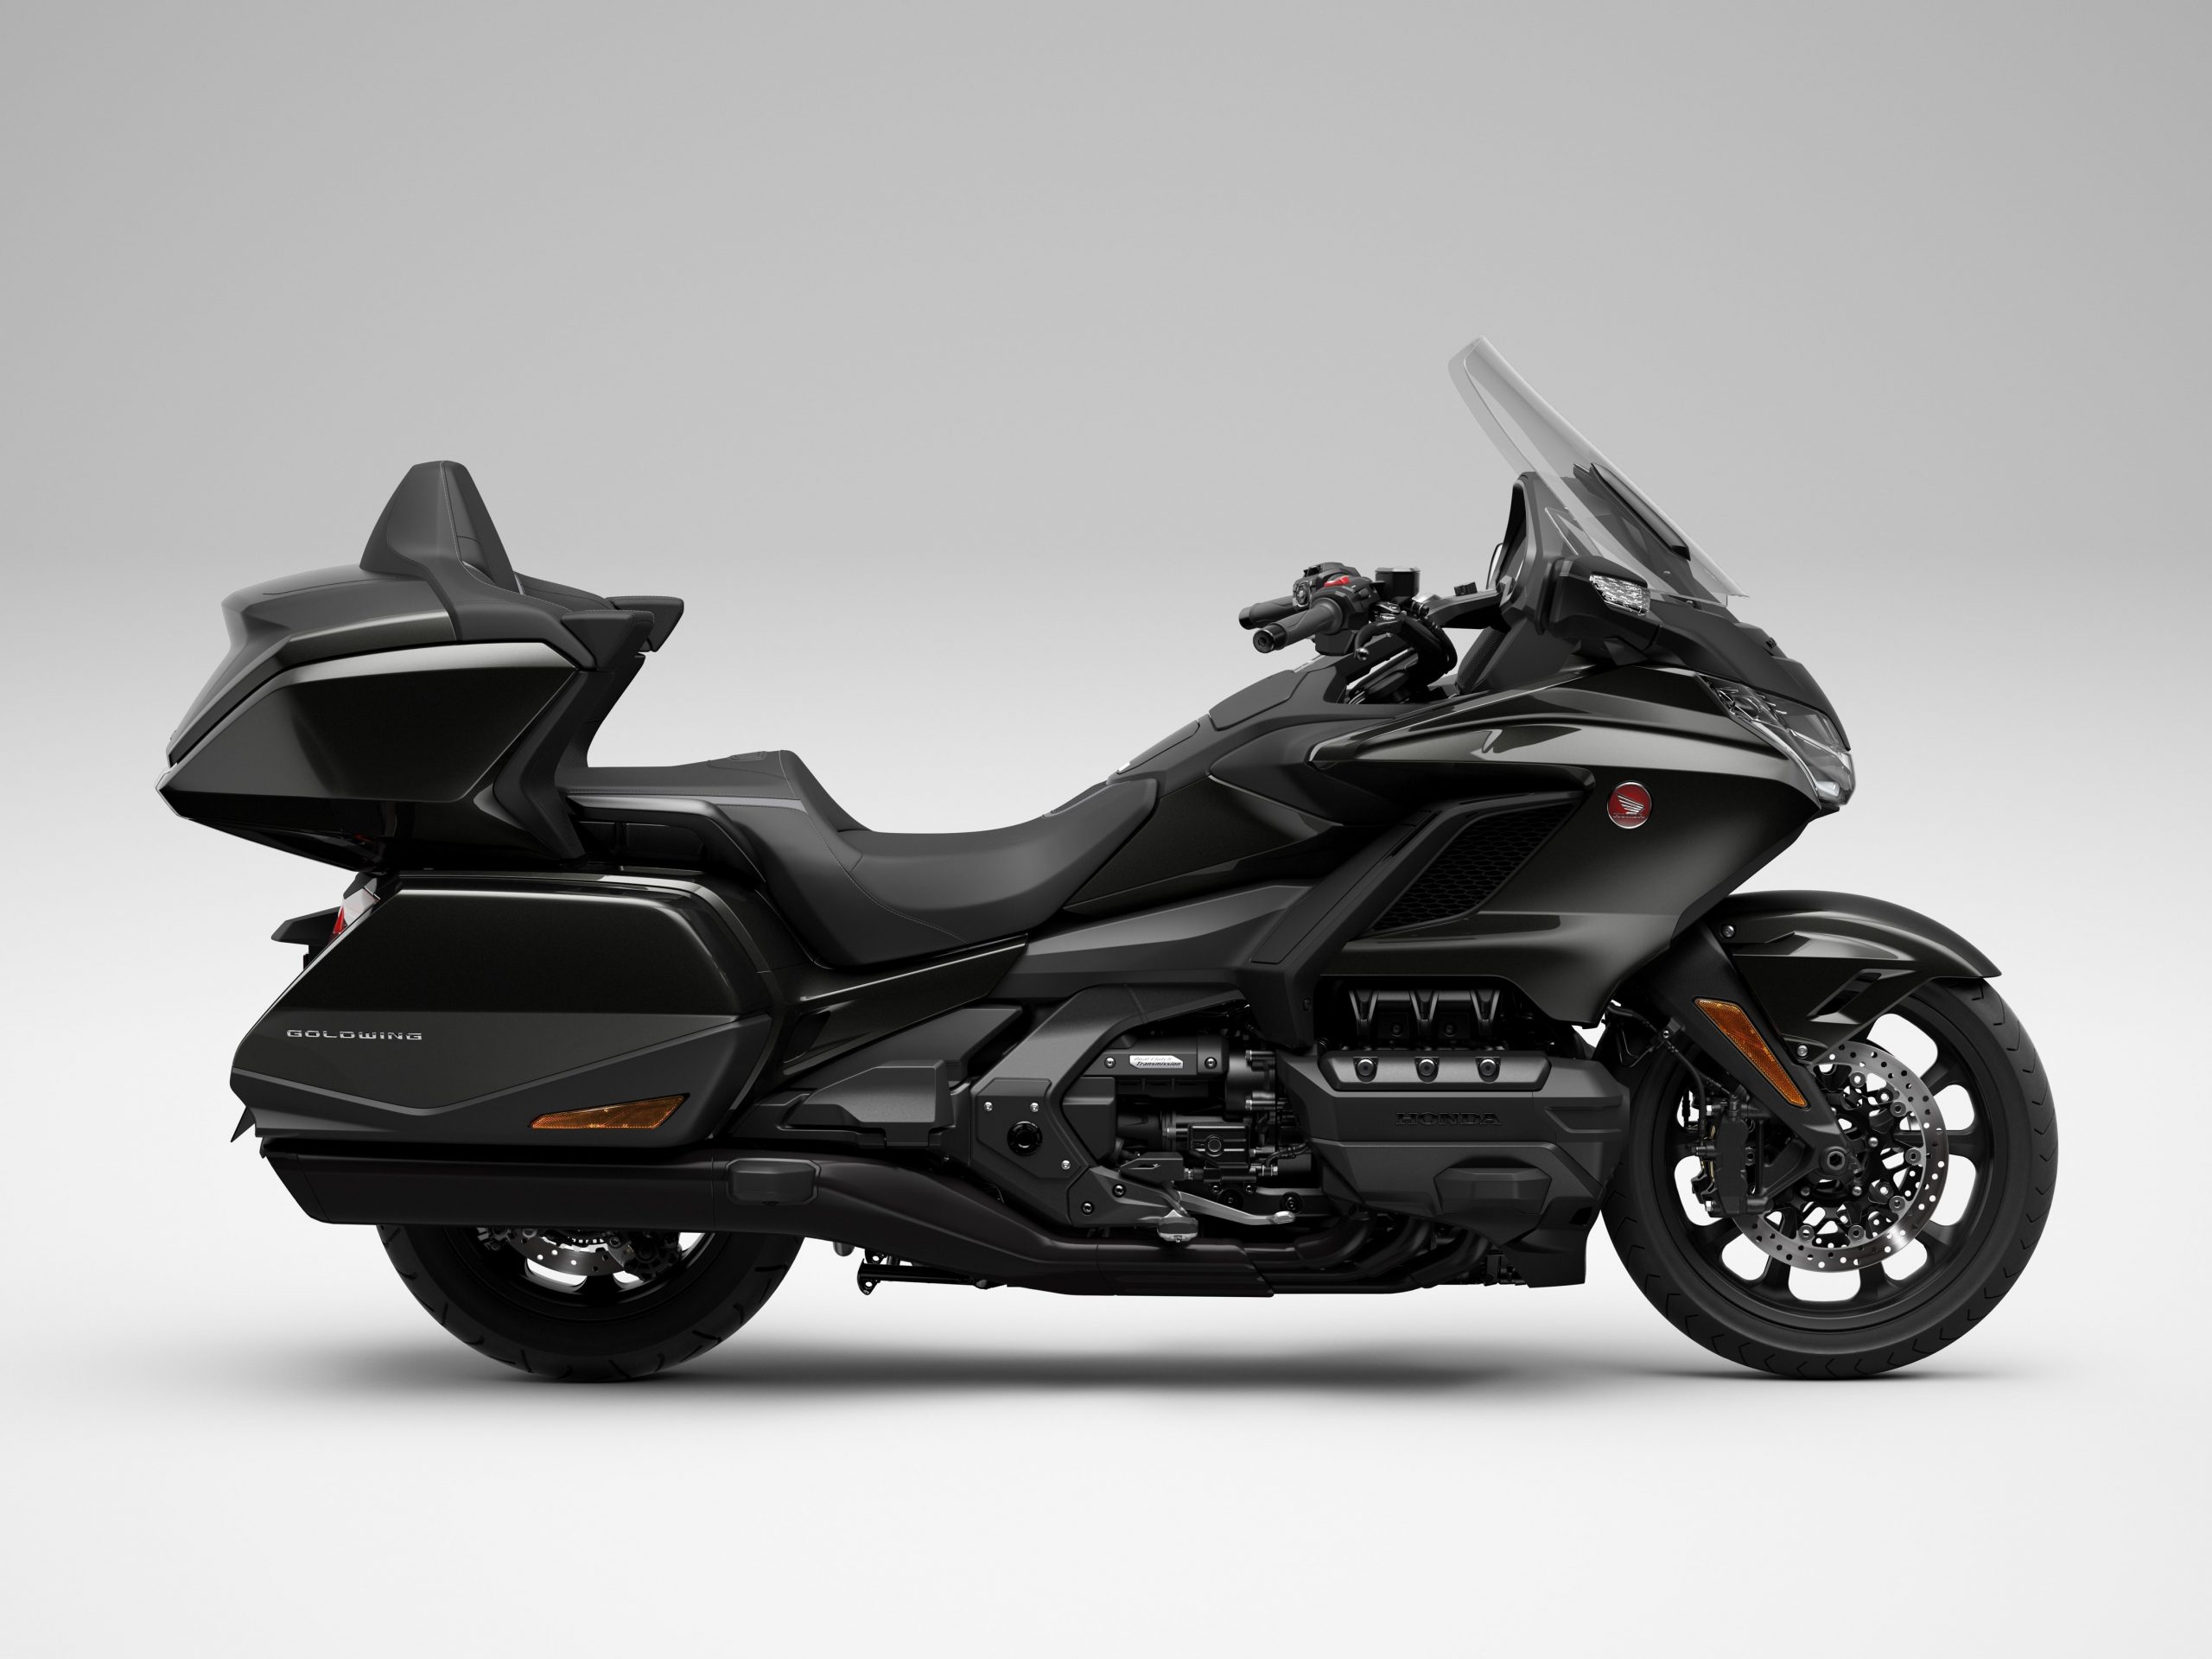 351201 22Ym Honda Gold Wing Tour Scaled